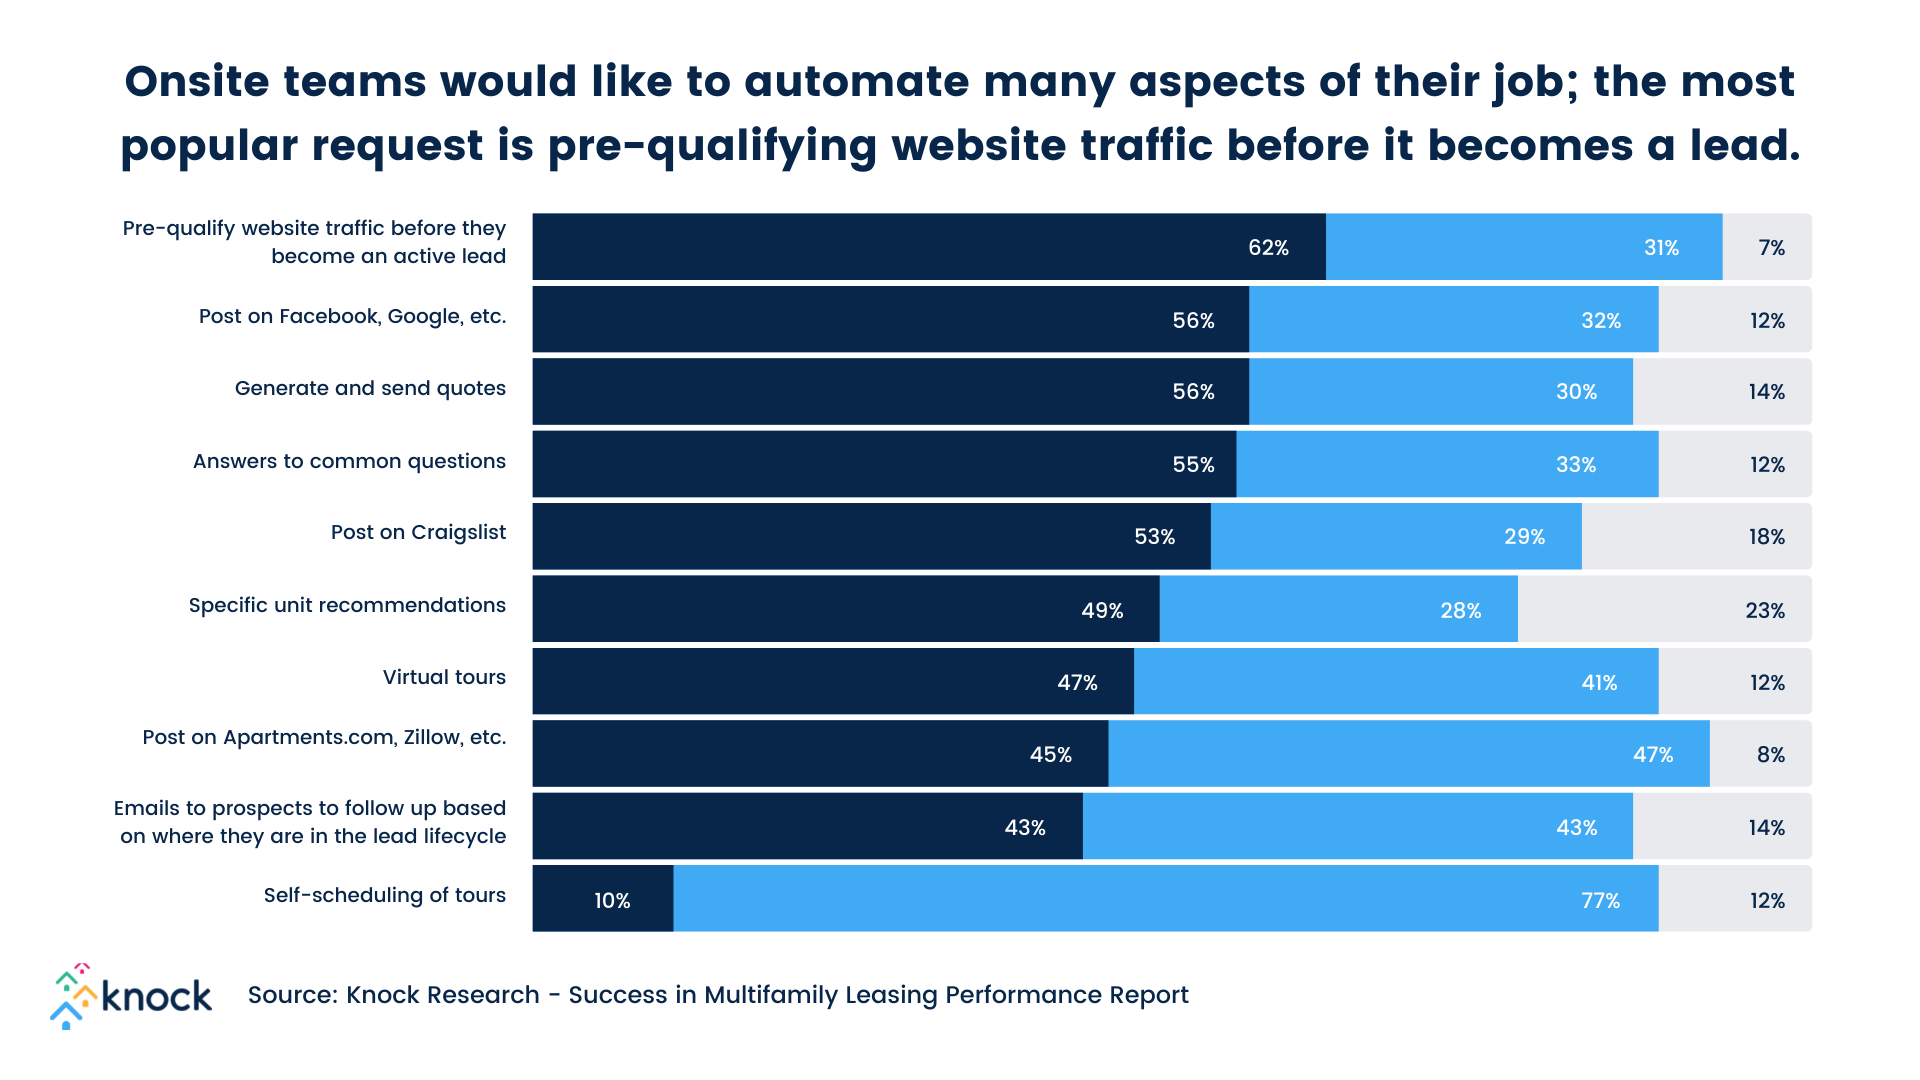 Knock's report shows: onsite teams would like to automate many aspects of their job